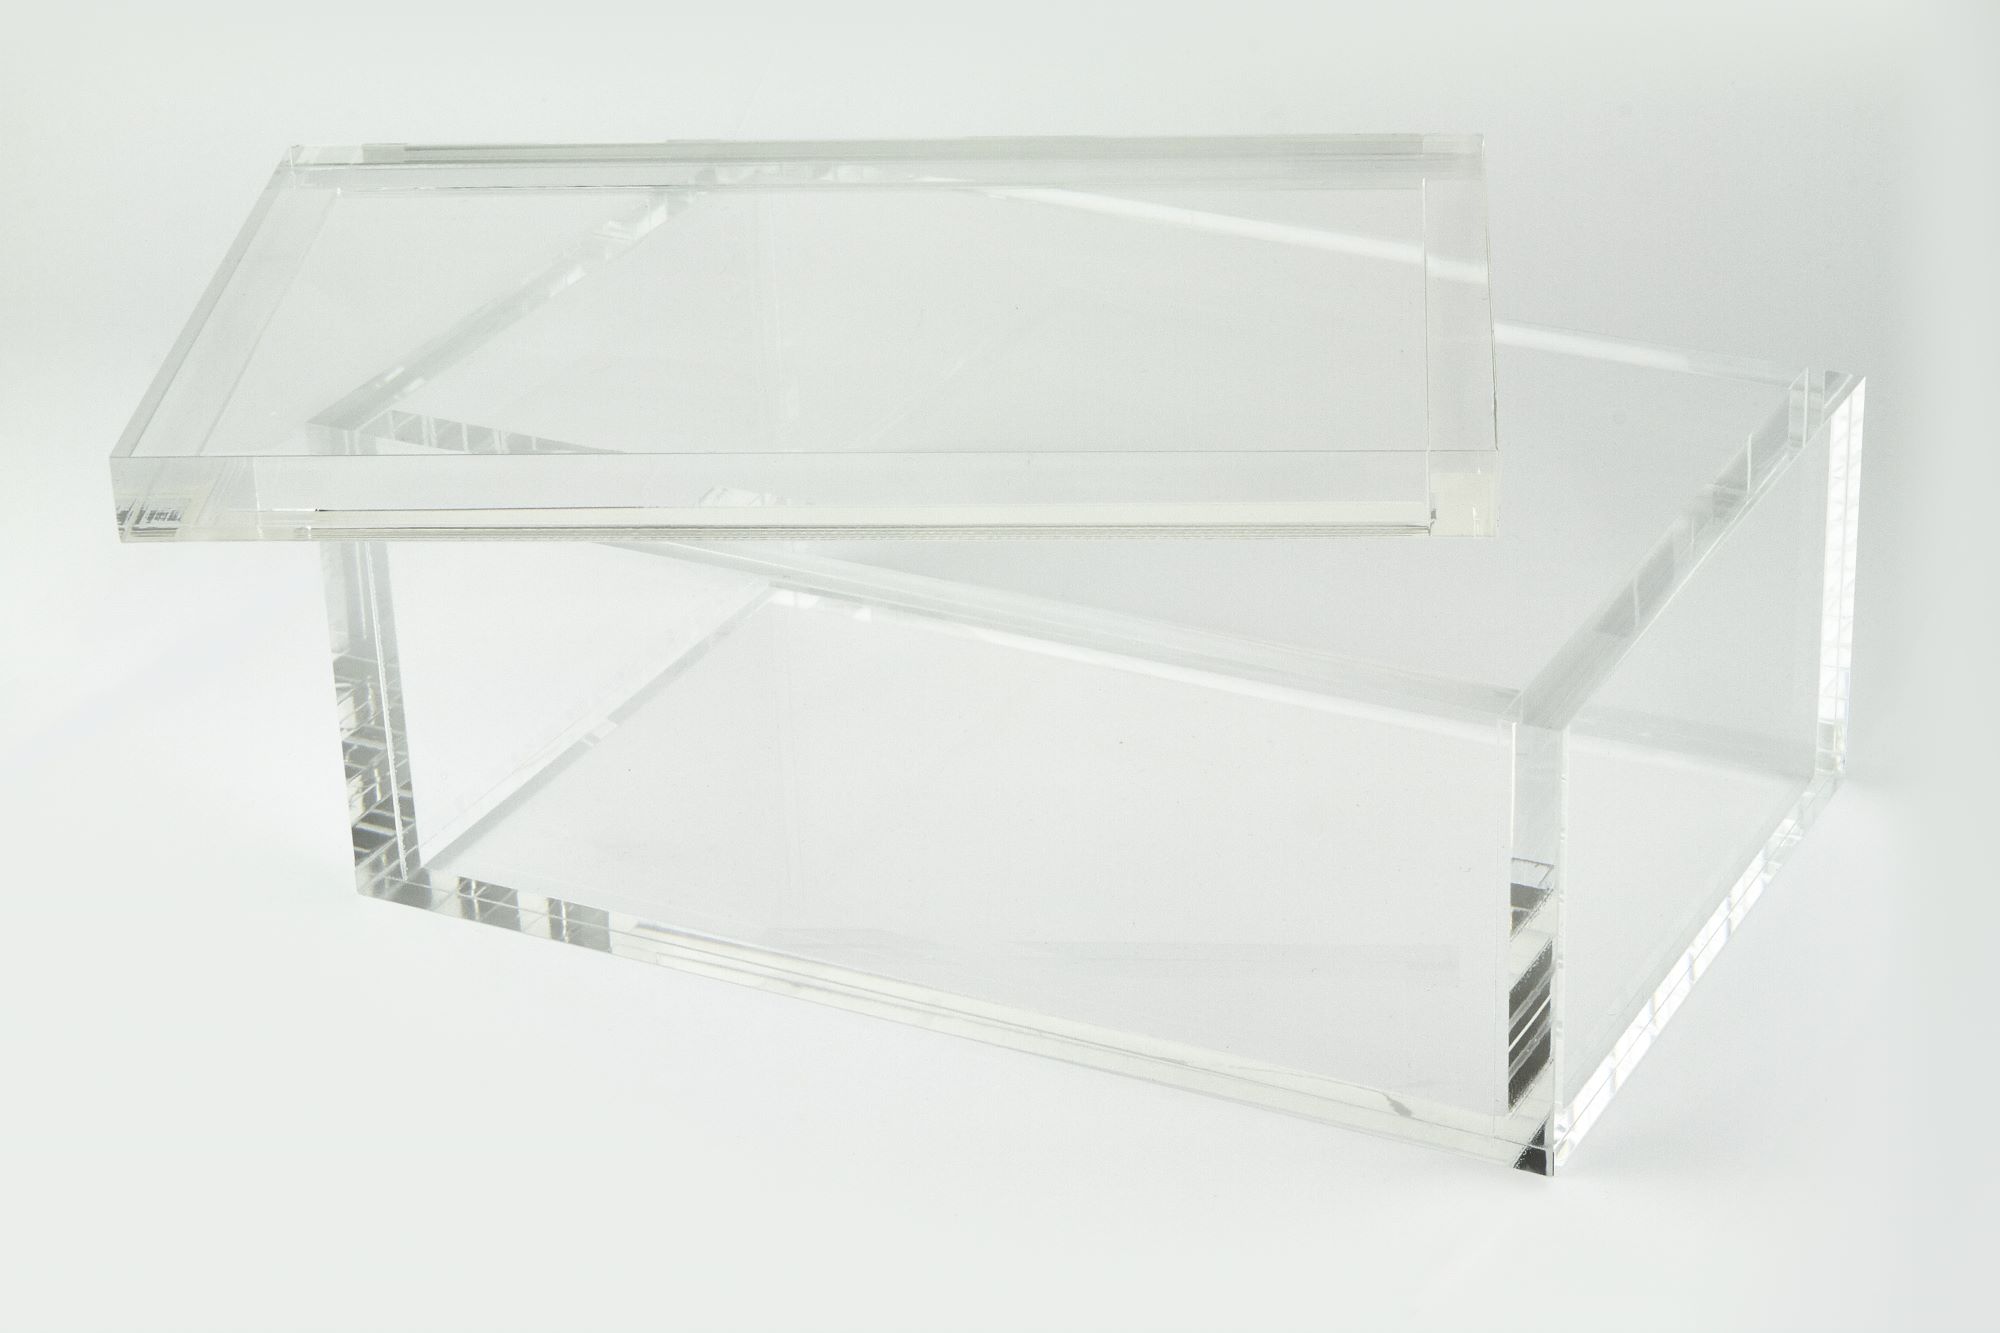 Clear Lucite Box withLid